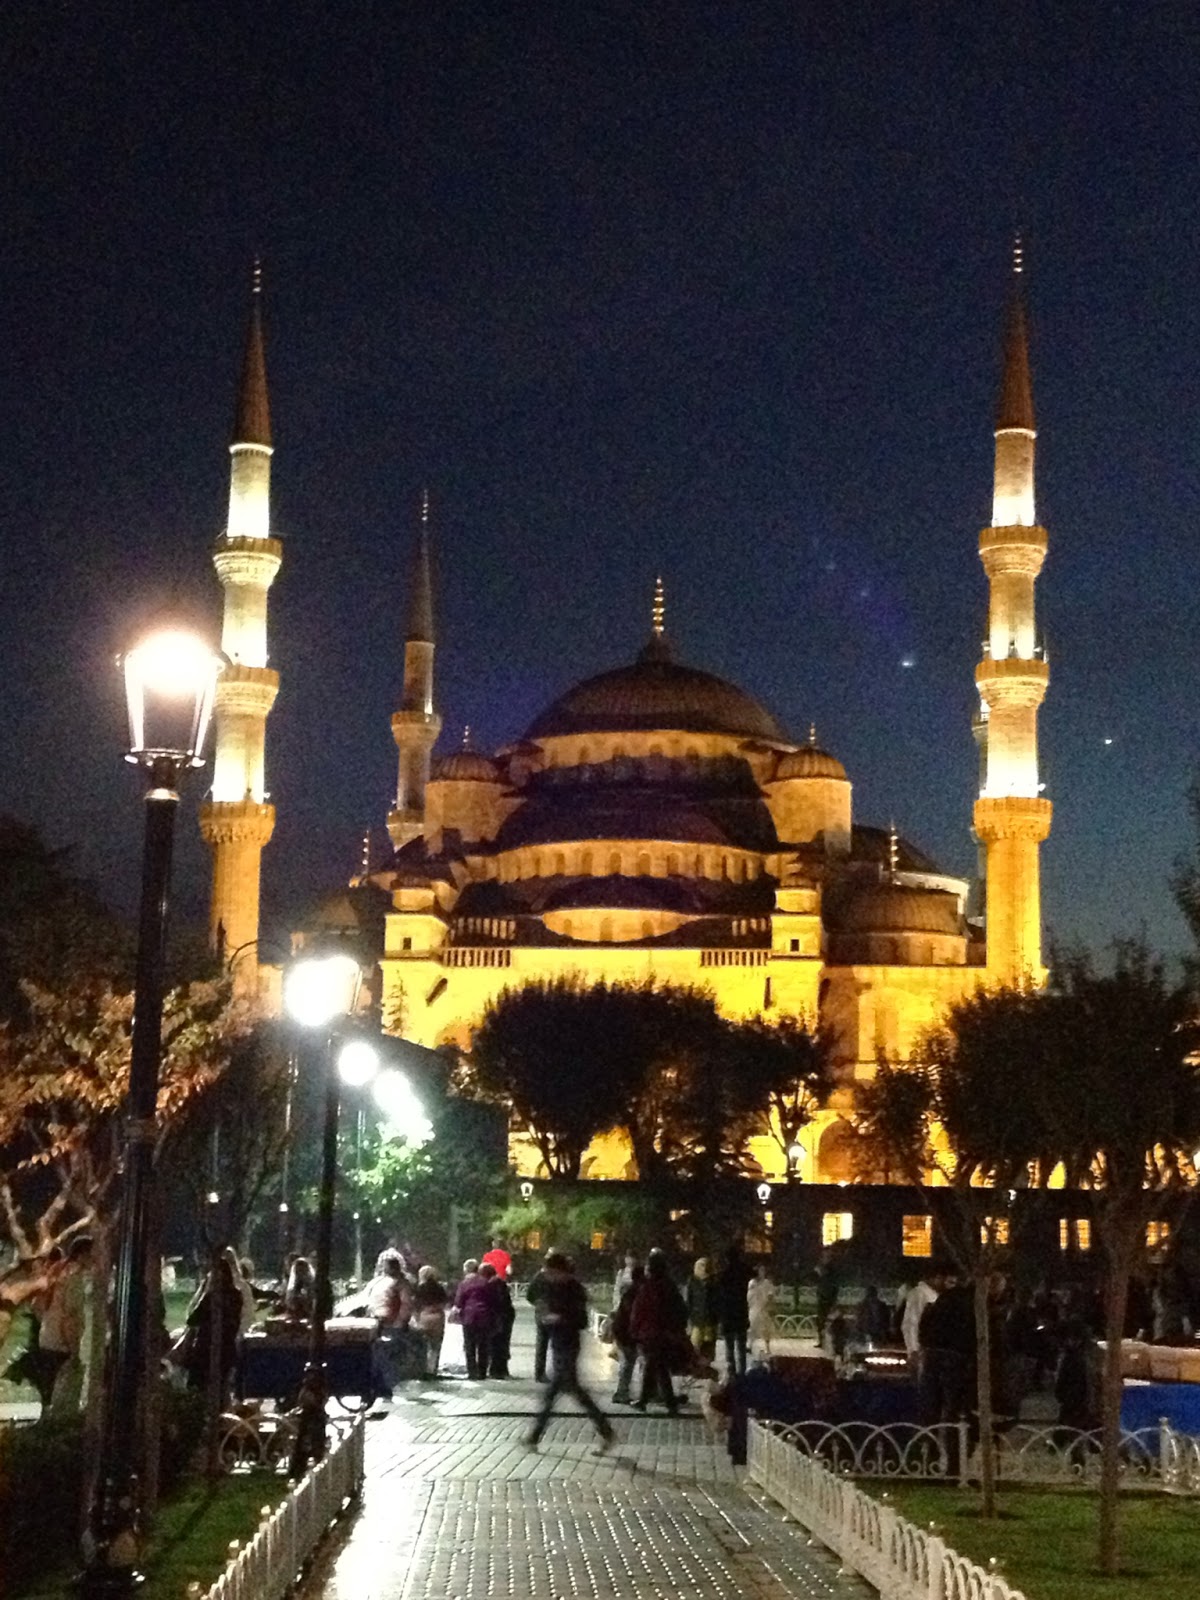 Istanbul - The Blue Mosque at night is really beautiful